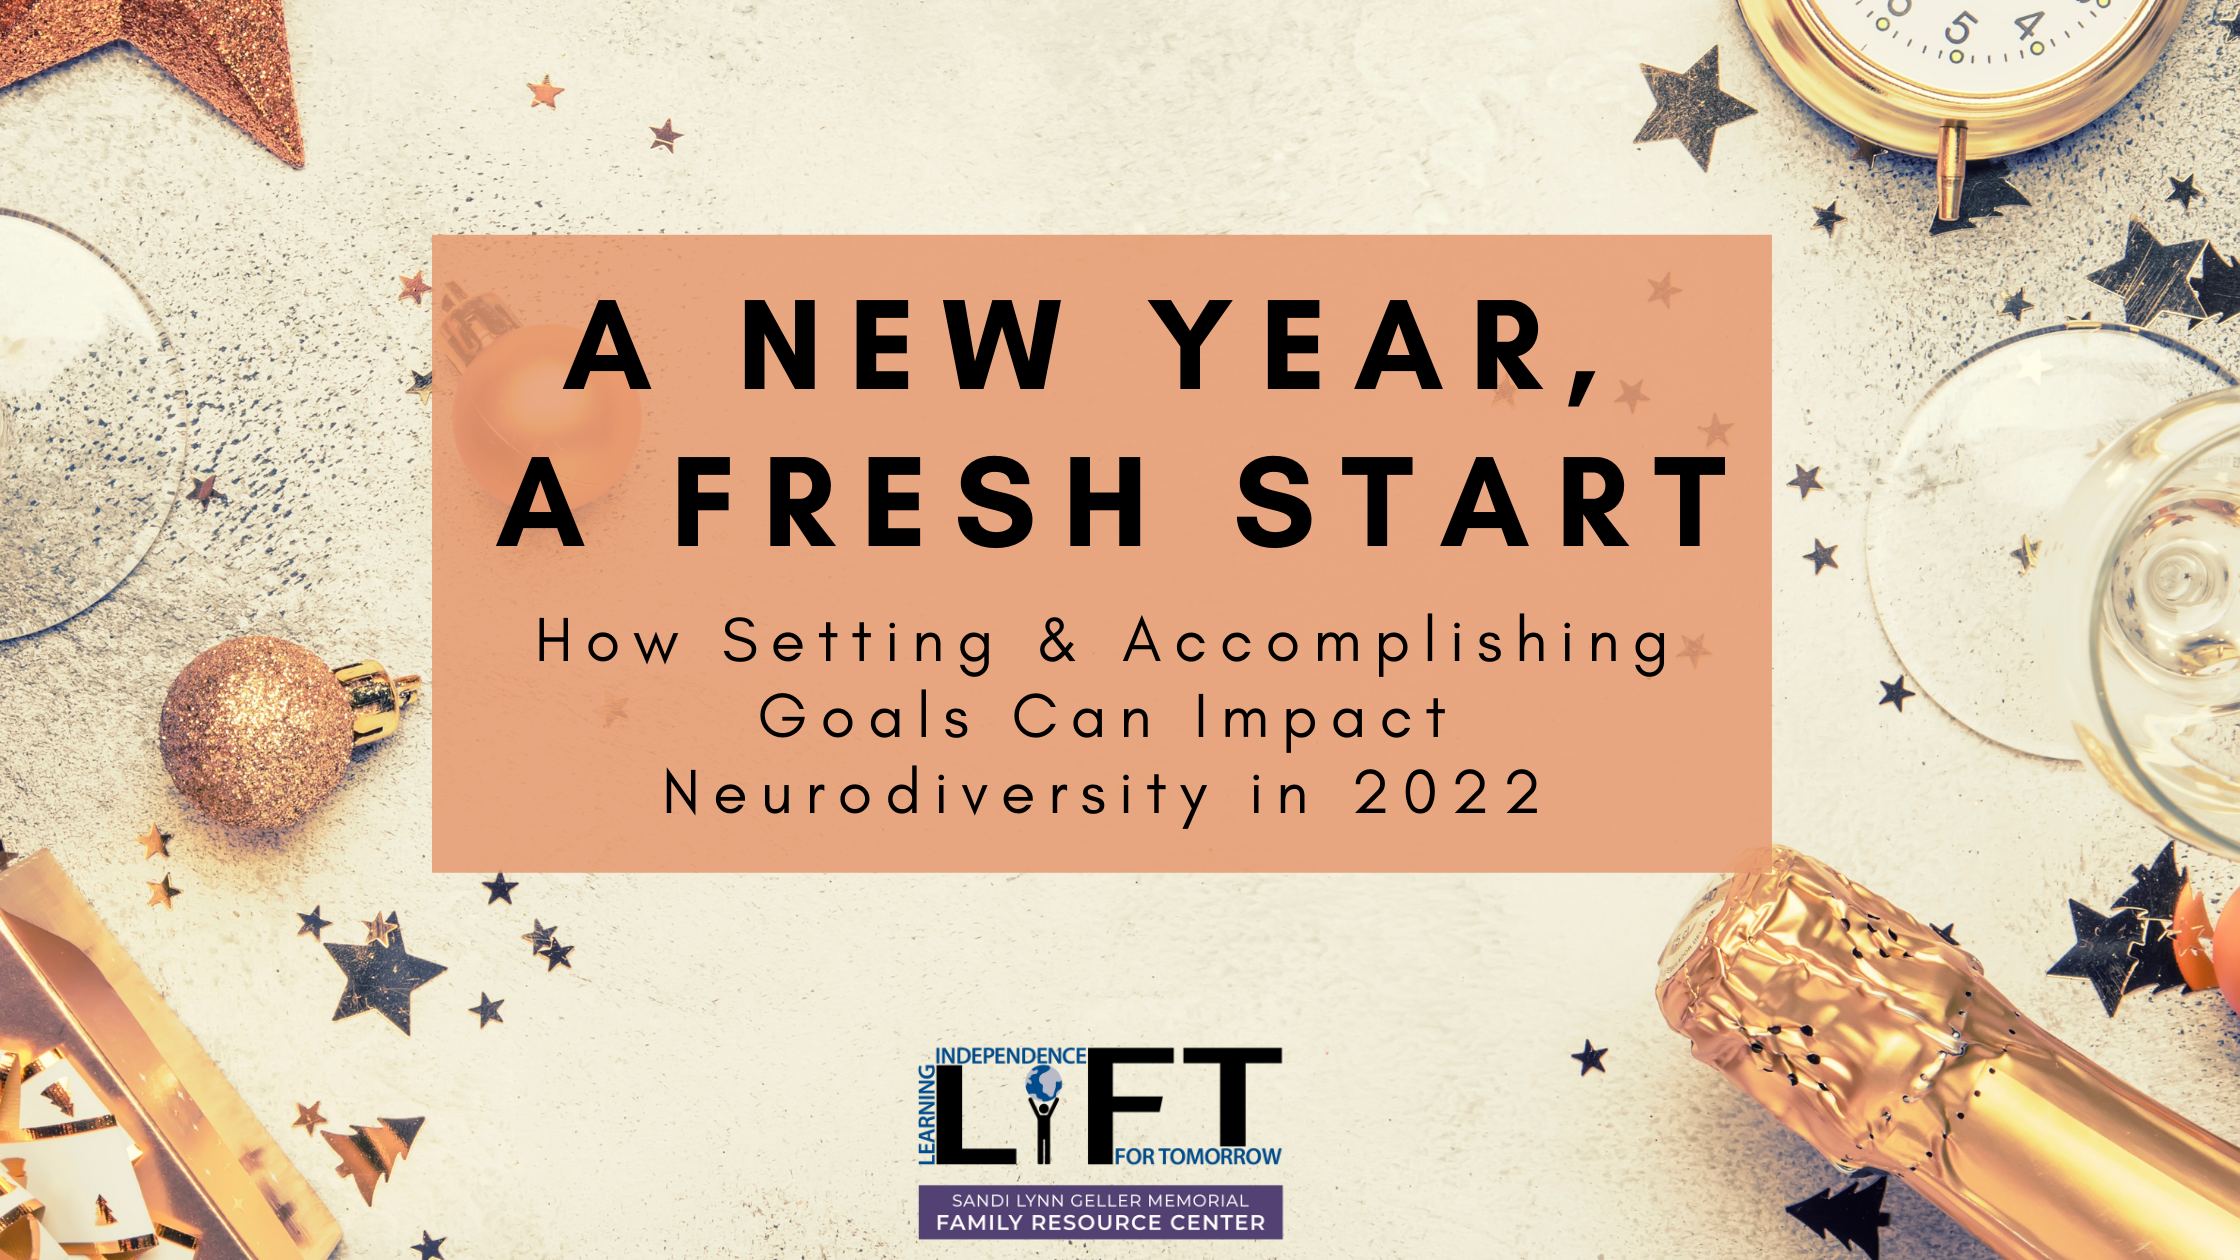 A New Year, A Fresh Start: How Setting and Accomplishing Goals Can Impact Neurodiversity in 2022